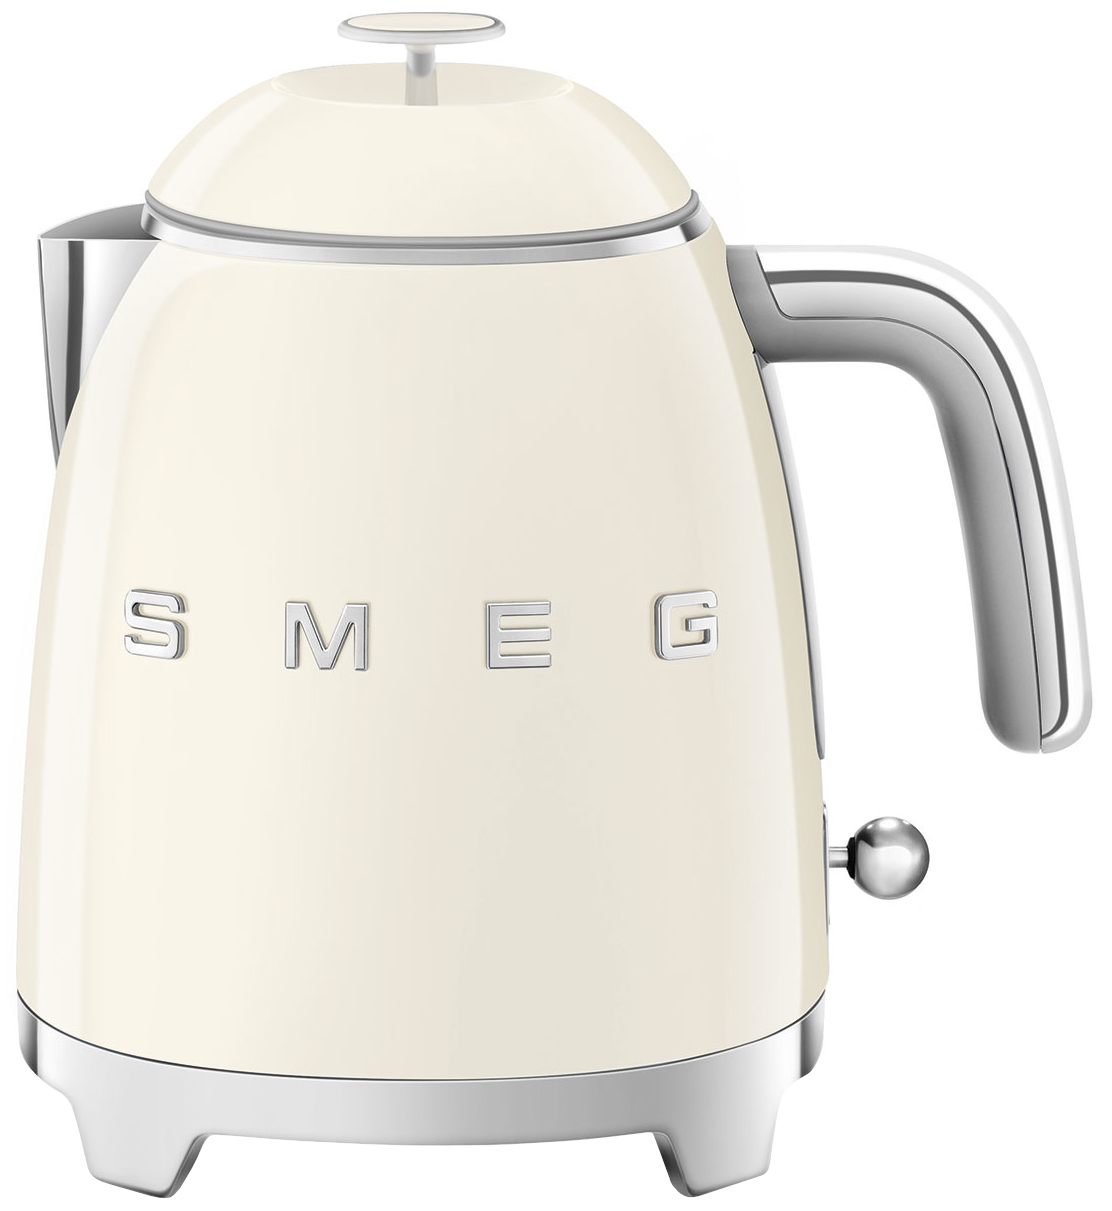 Best Buy: Haden Heritage Electric Kettle Black and Chrome 75095